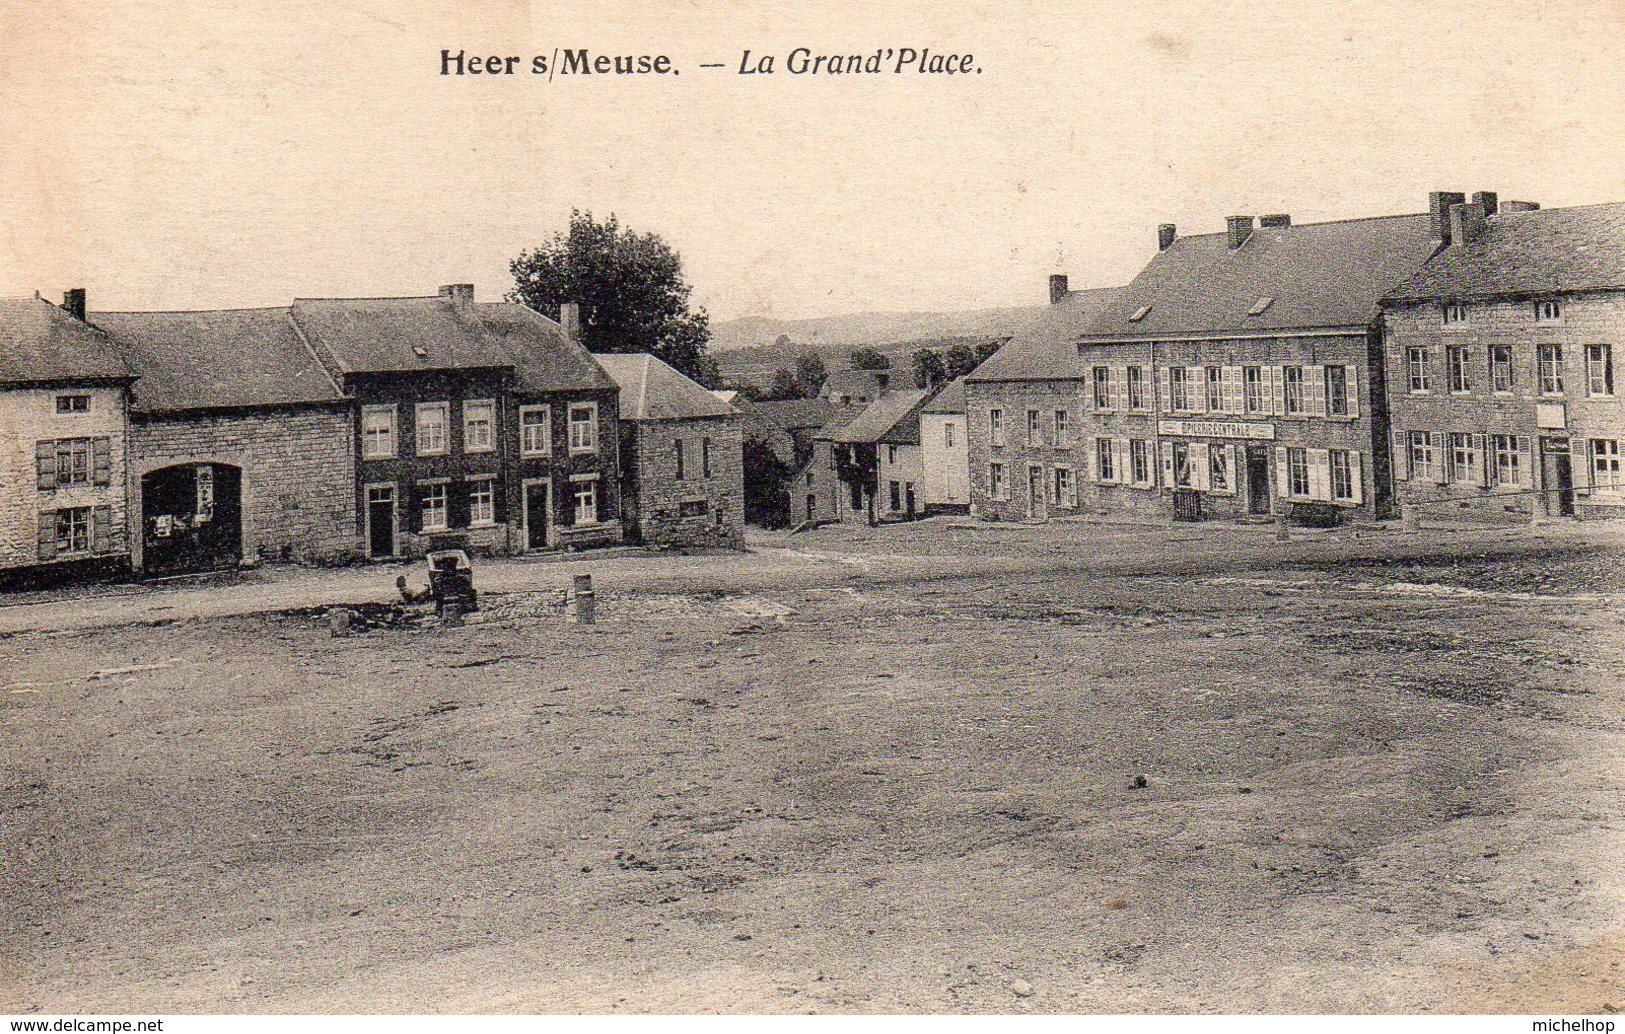 Heer S/Meuse - La Grand'Place - Hastiere